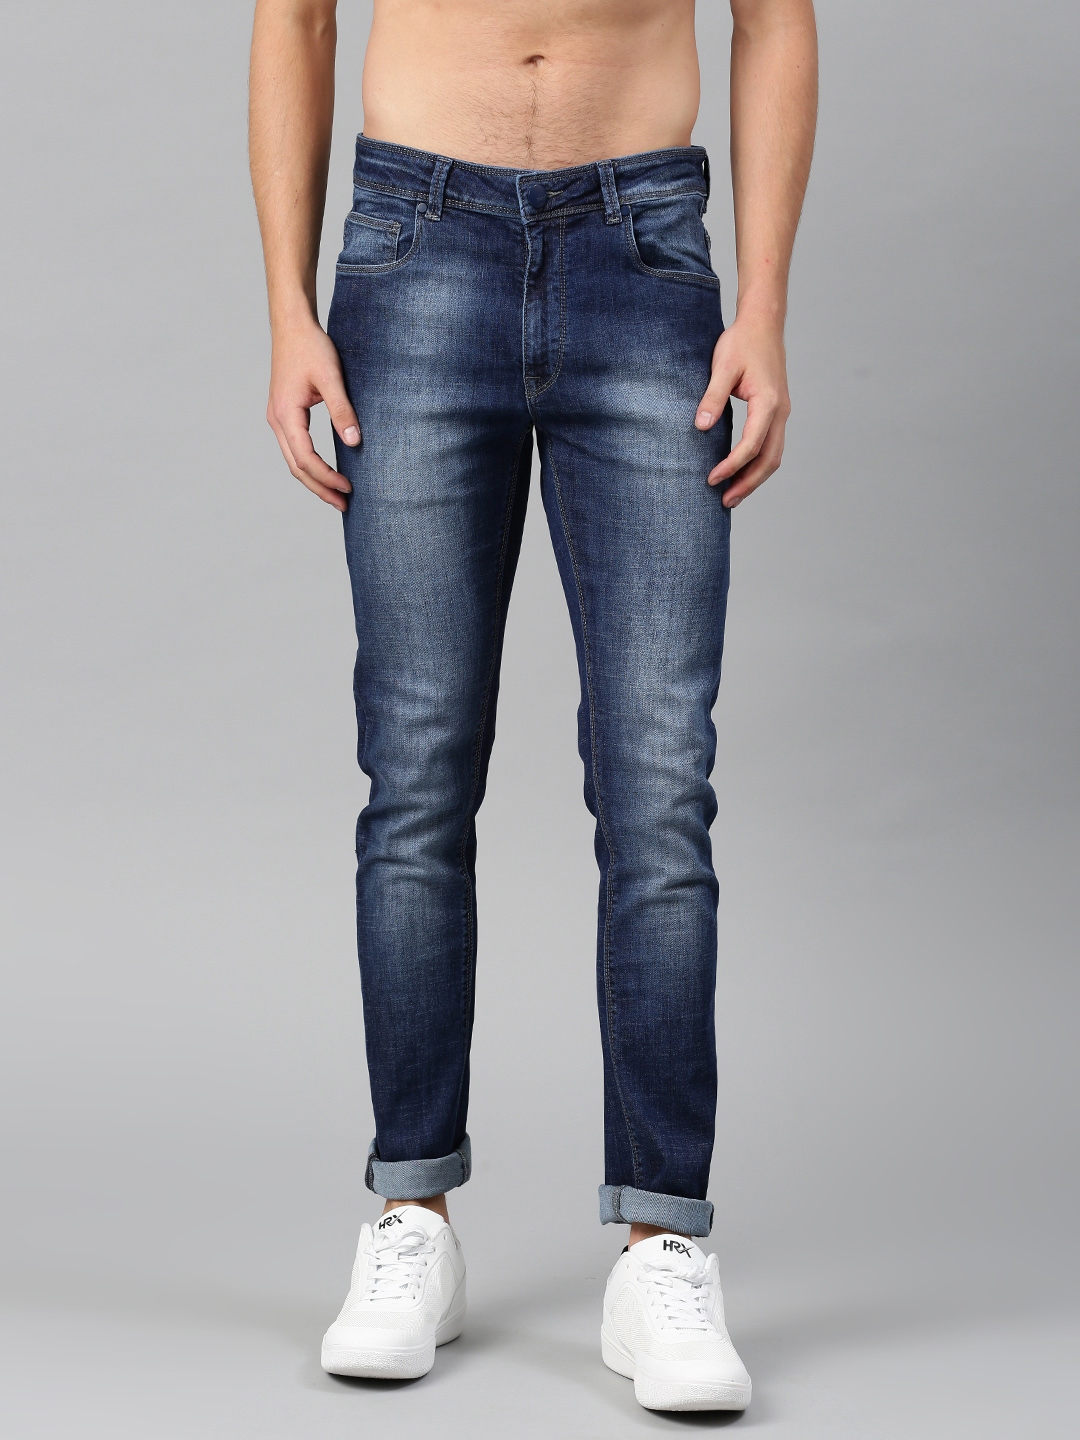 Mens Jeans  Buy Mens Jeans online in India